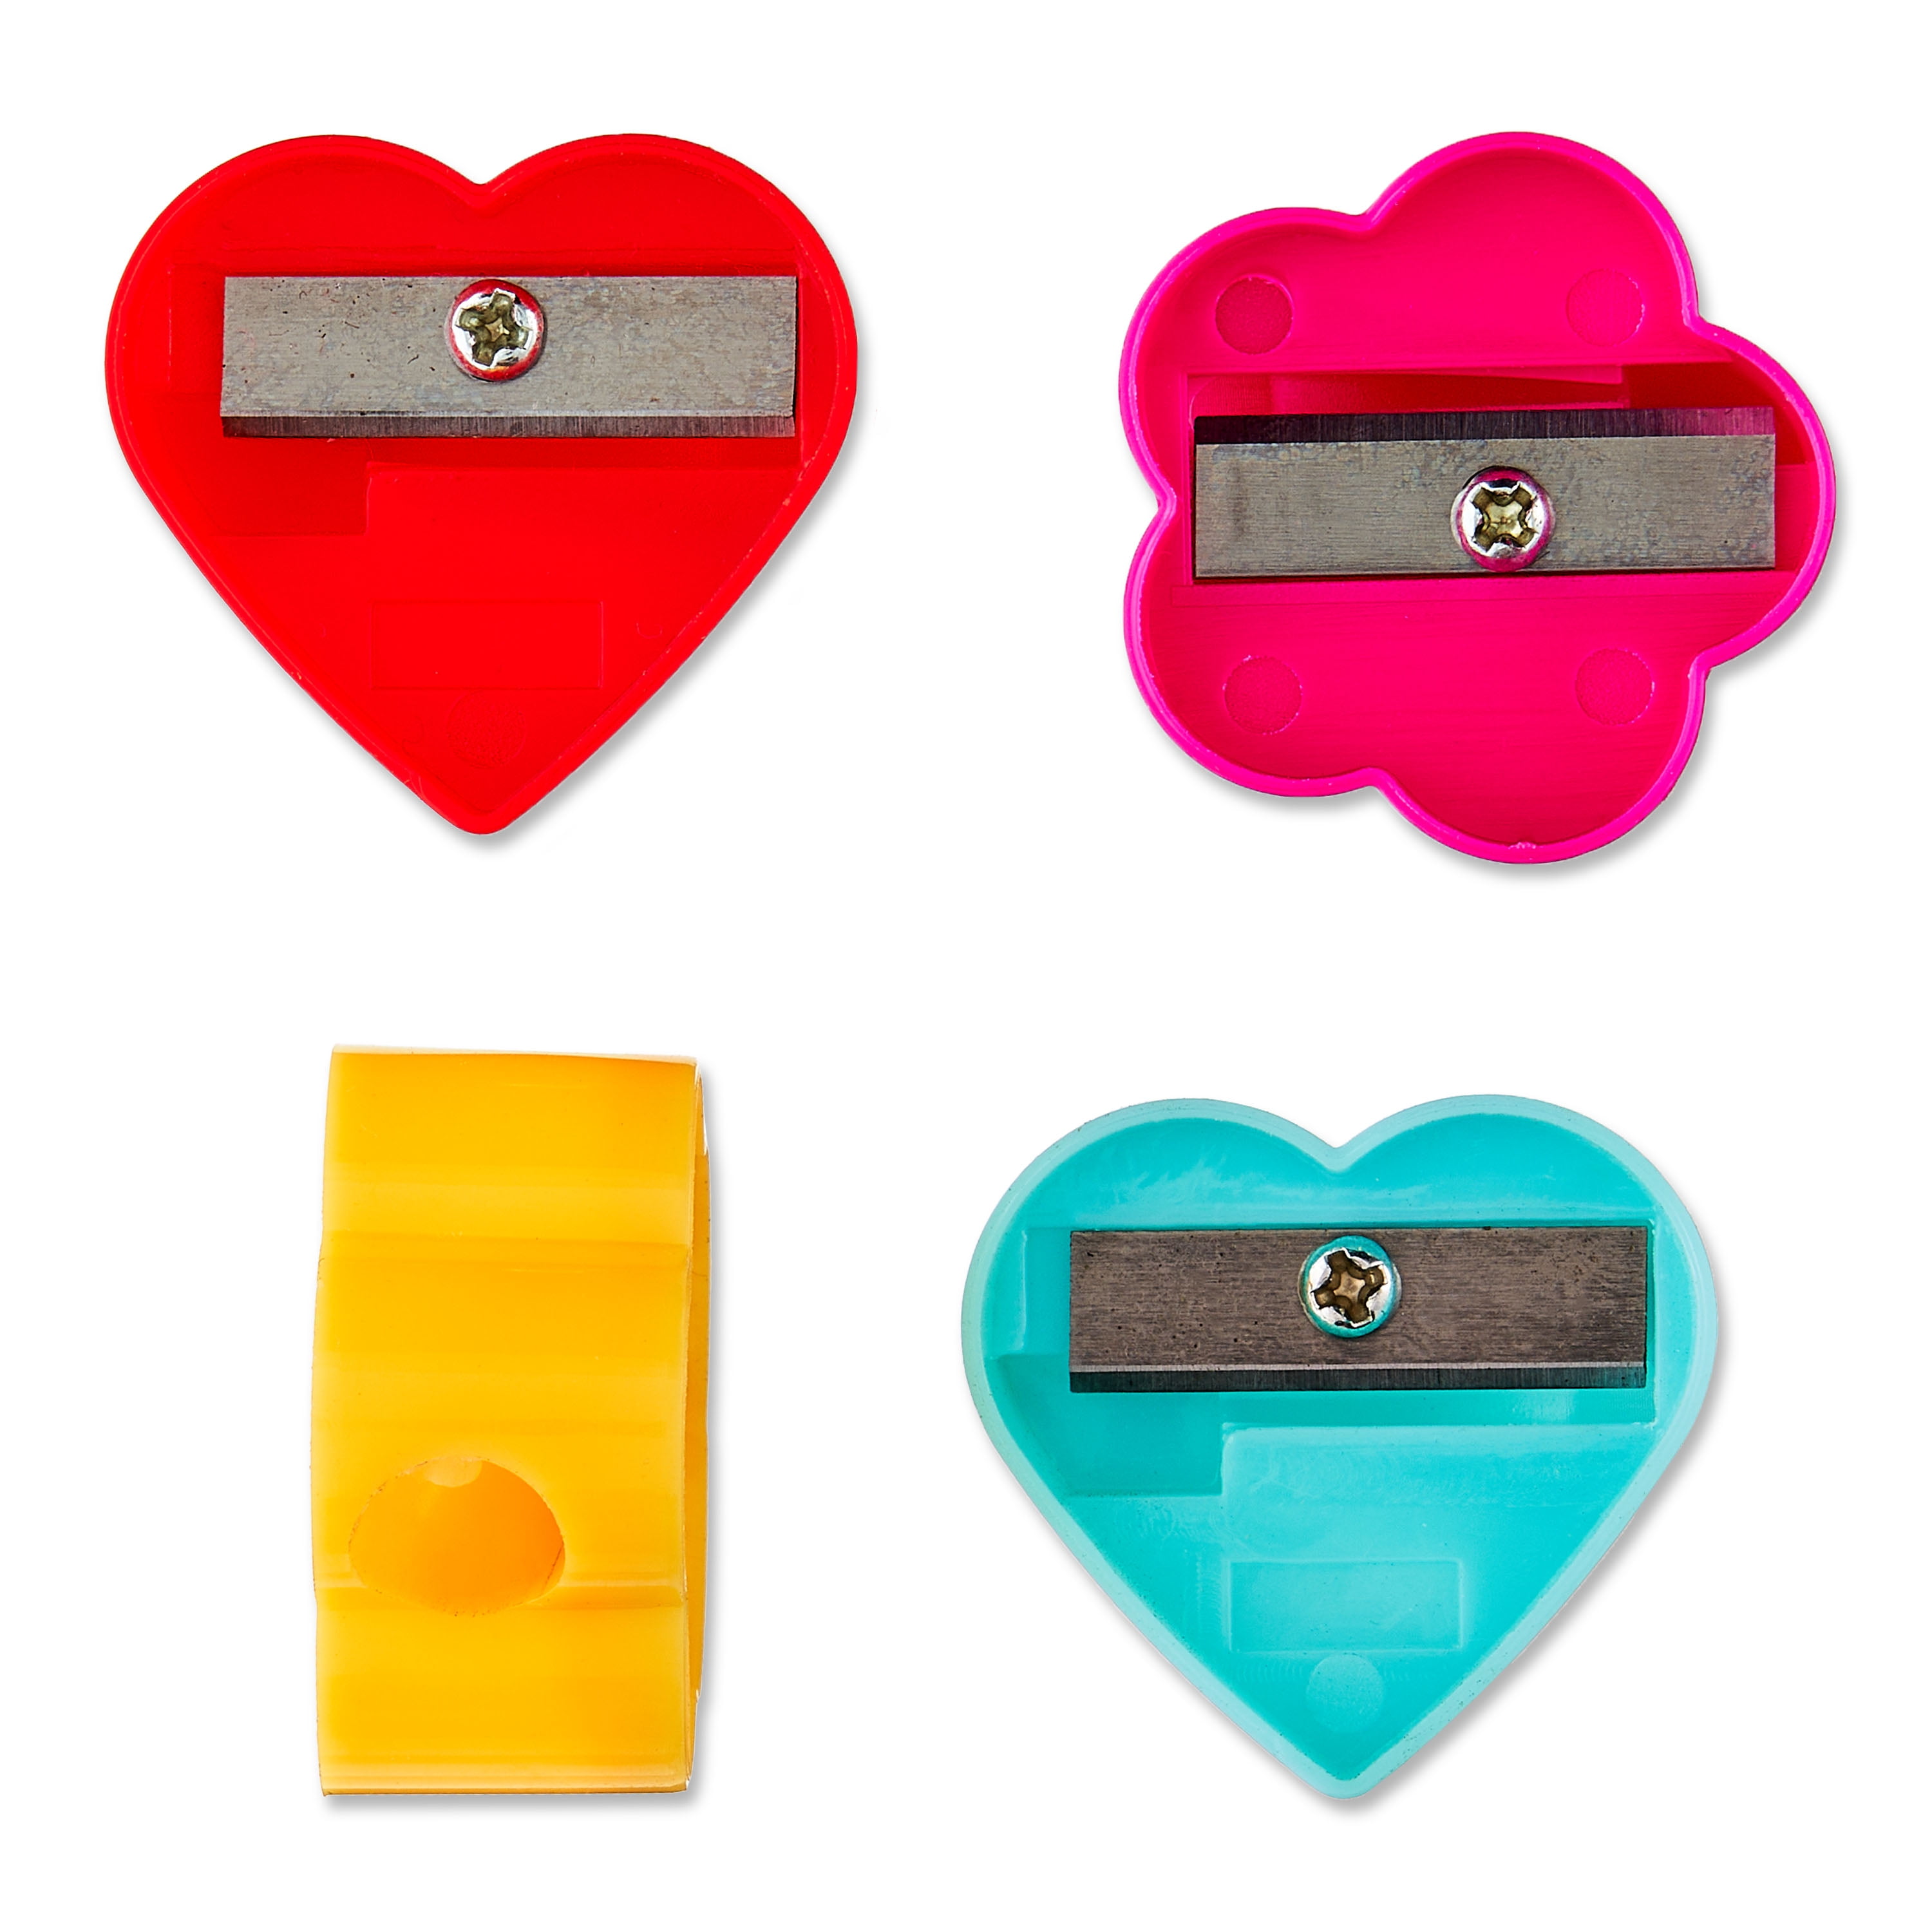 WAY TO CELEBRATE! Way To Celebrate 12 Pencil Sharpener, Party Favors, 12 Counts, Flower and Heart shape, Plastic. Red, Pink, Yellow and Teal Color.